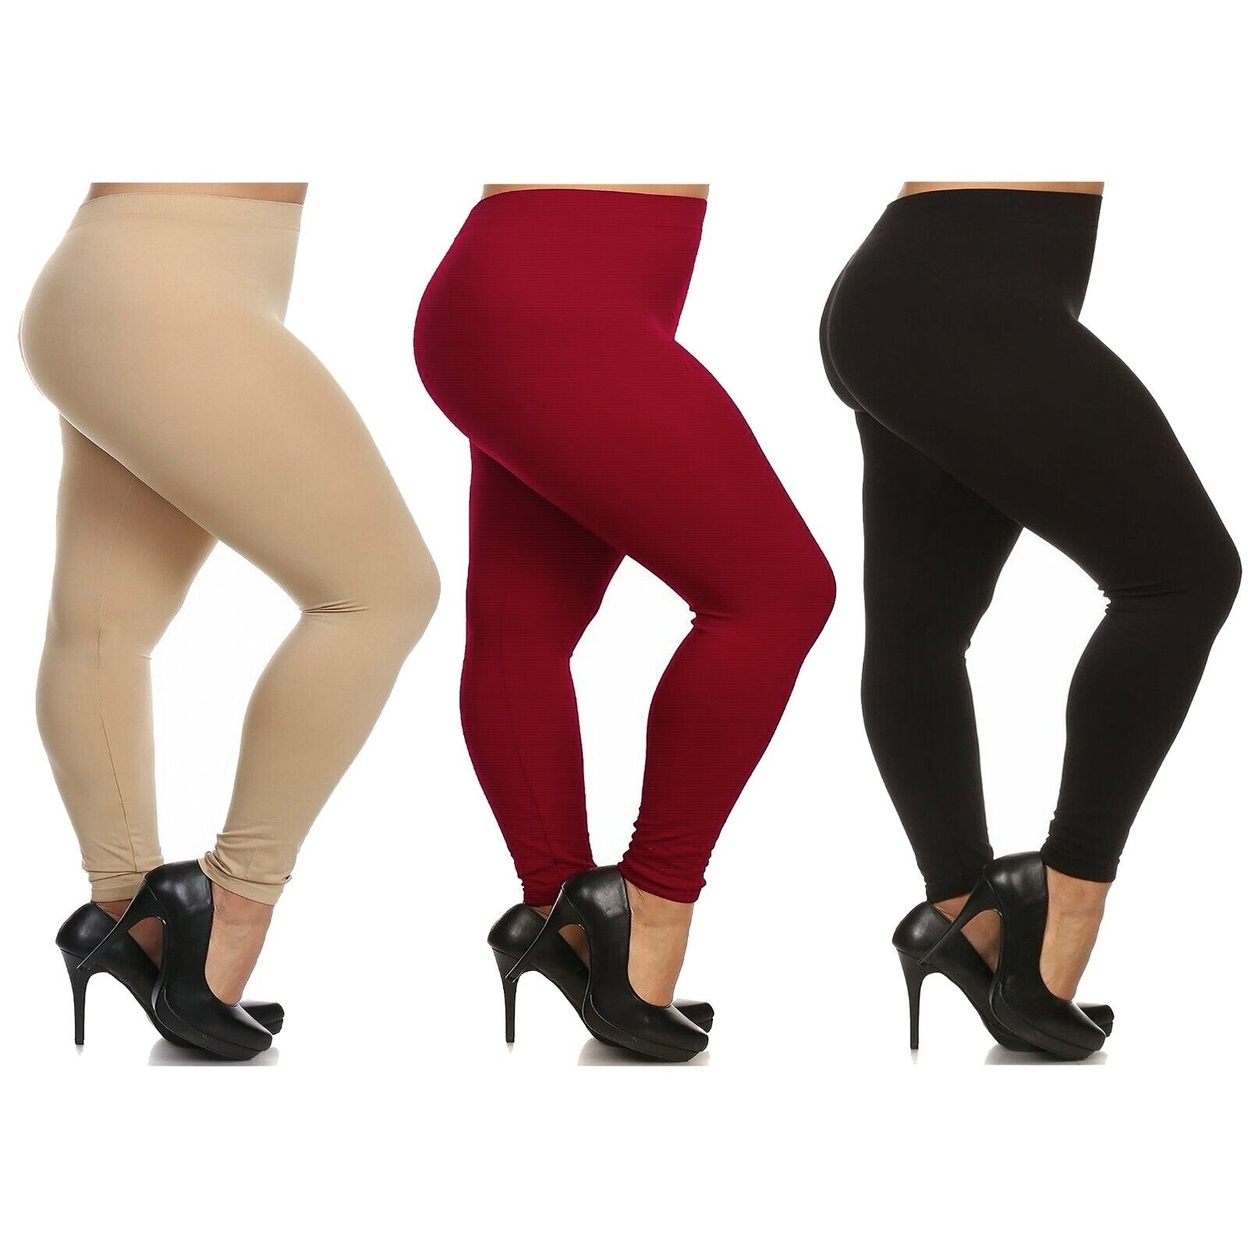 3-Pack: Women's Casual Ultra-Soft Smooth High Waisted Athletic Active Yoga Leggings Plus Size Available - Beige,beige,beige, 2x